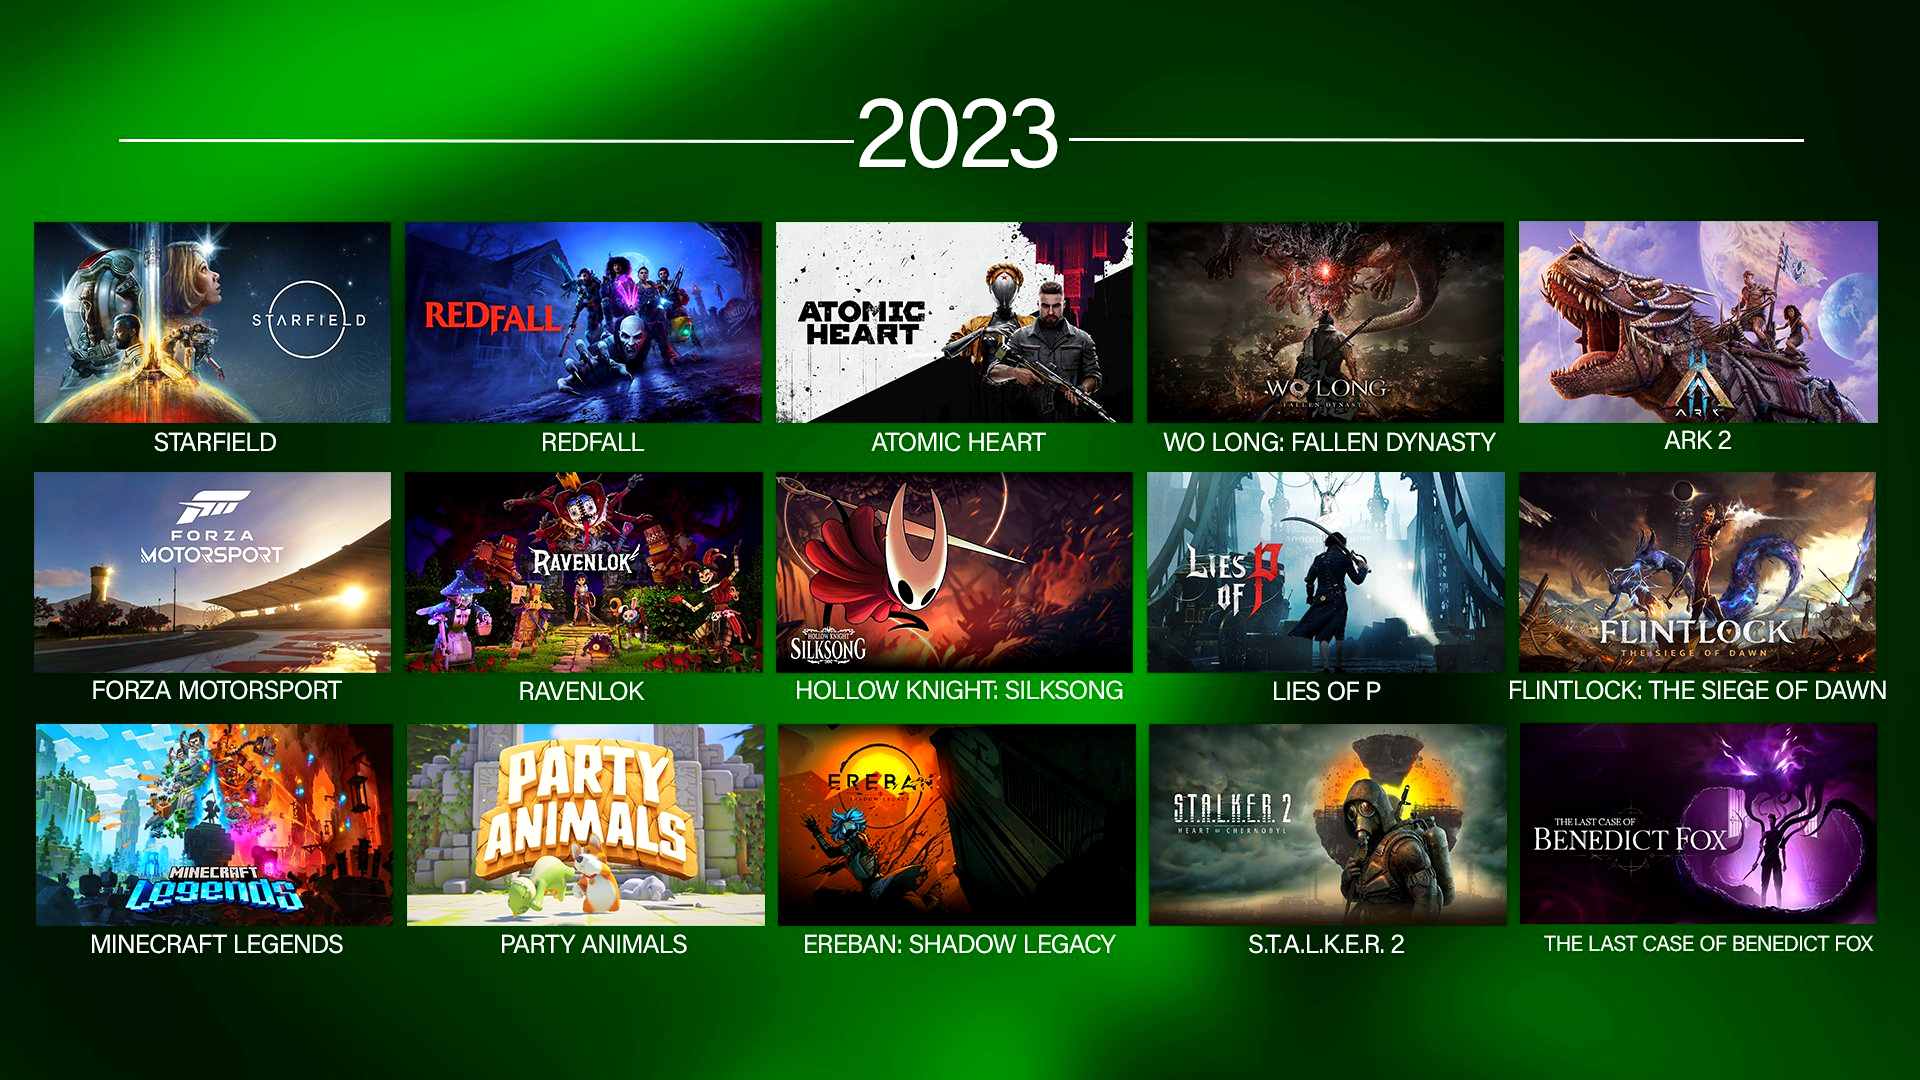 No one can discredit the achievements and merits of the Xbox Game Pass unless they're actively trying to go against everything that's consumer-friendly.